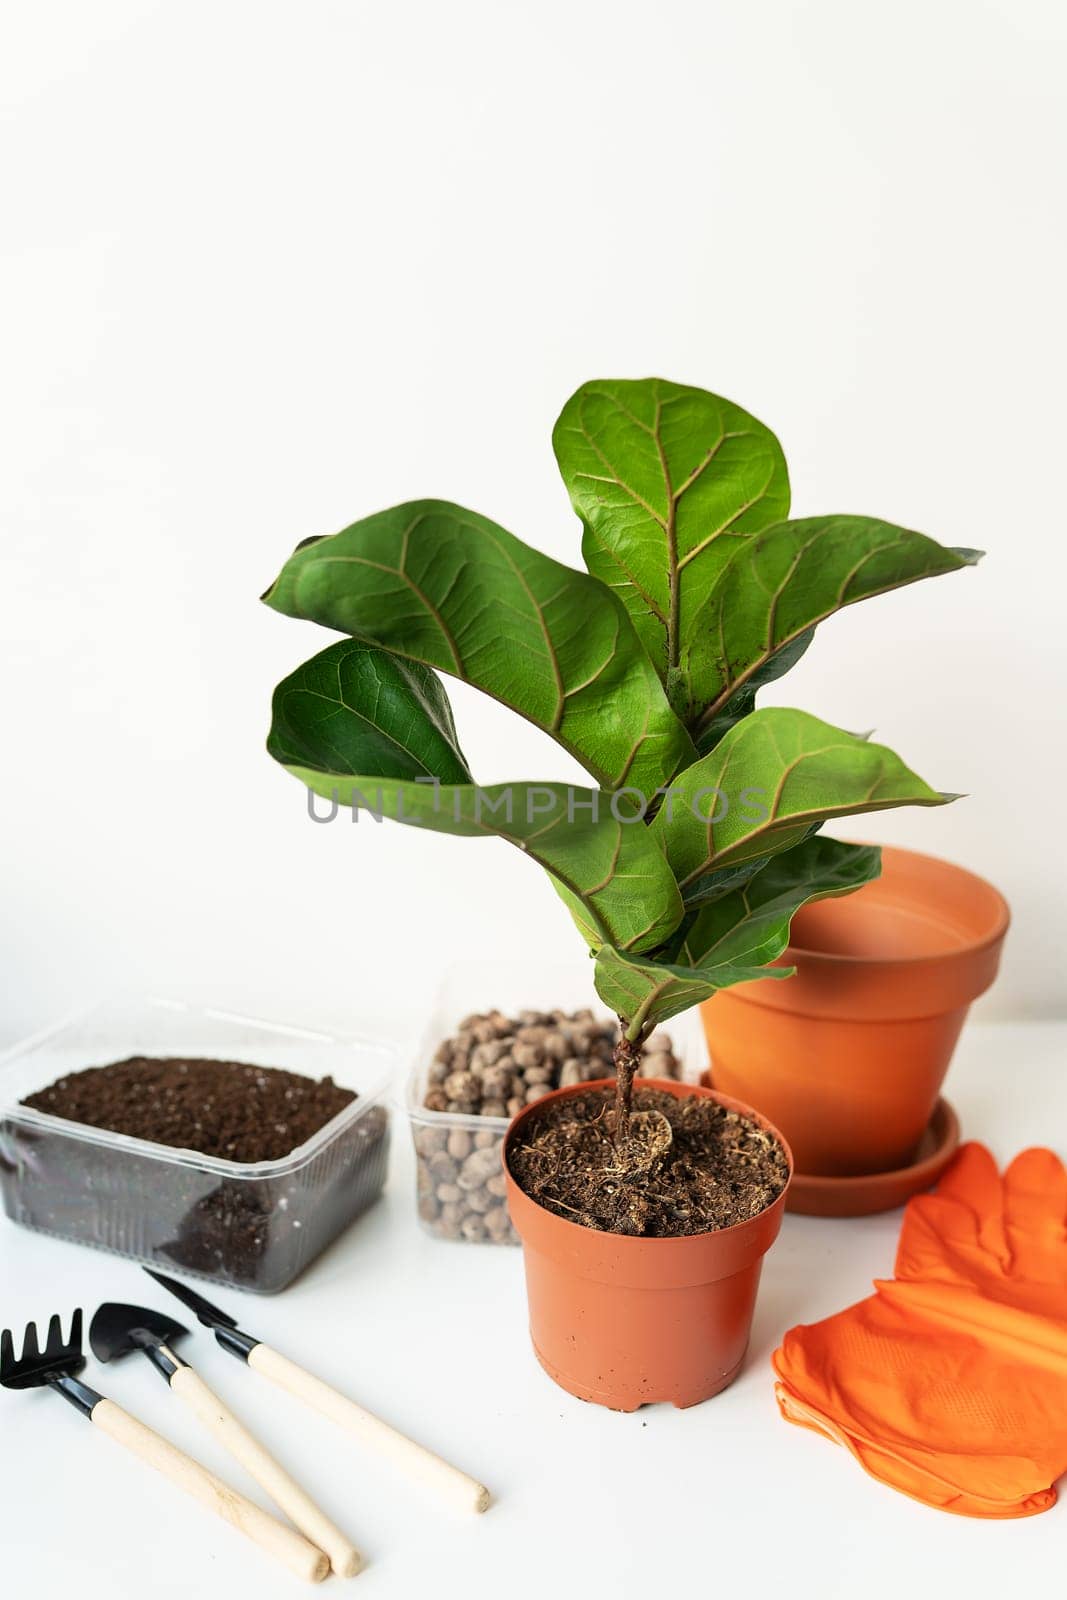 Accessories for transplanting a flowerpot-ficus lyrata. Potted home plant ficus lyrata. Home gardening. Plants that are air purifiers